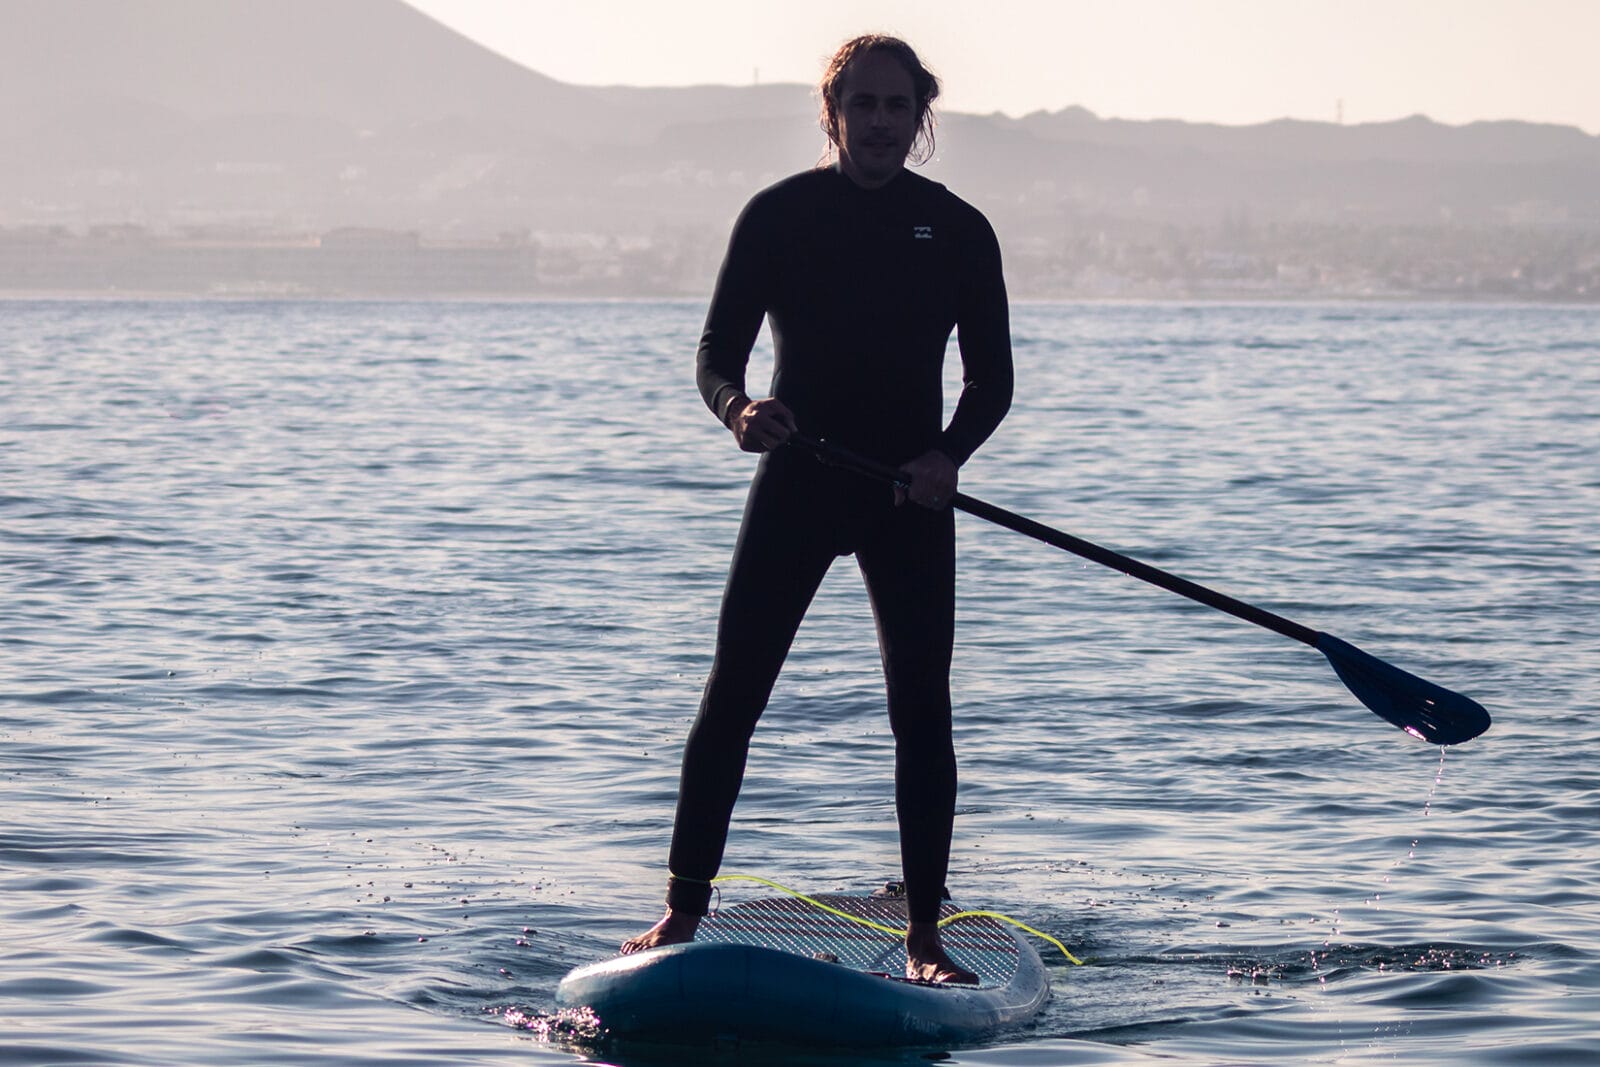 can you use a sup board to surf